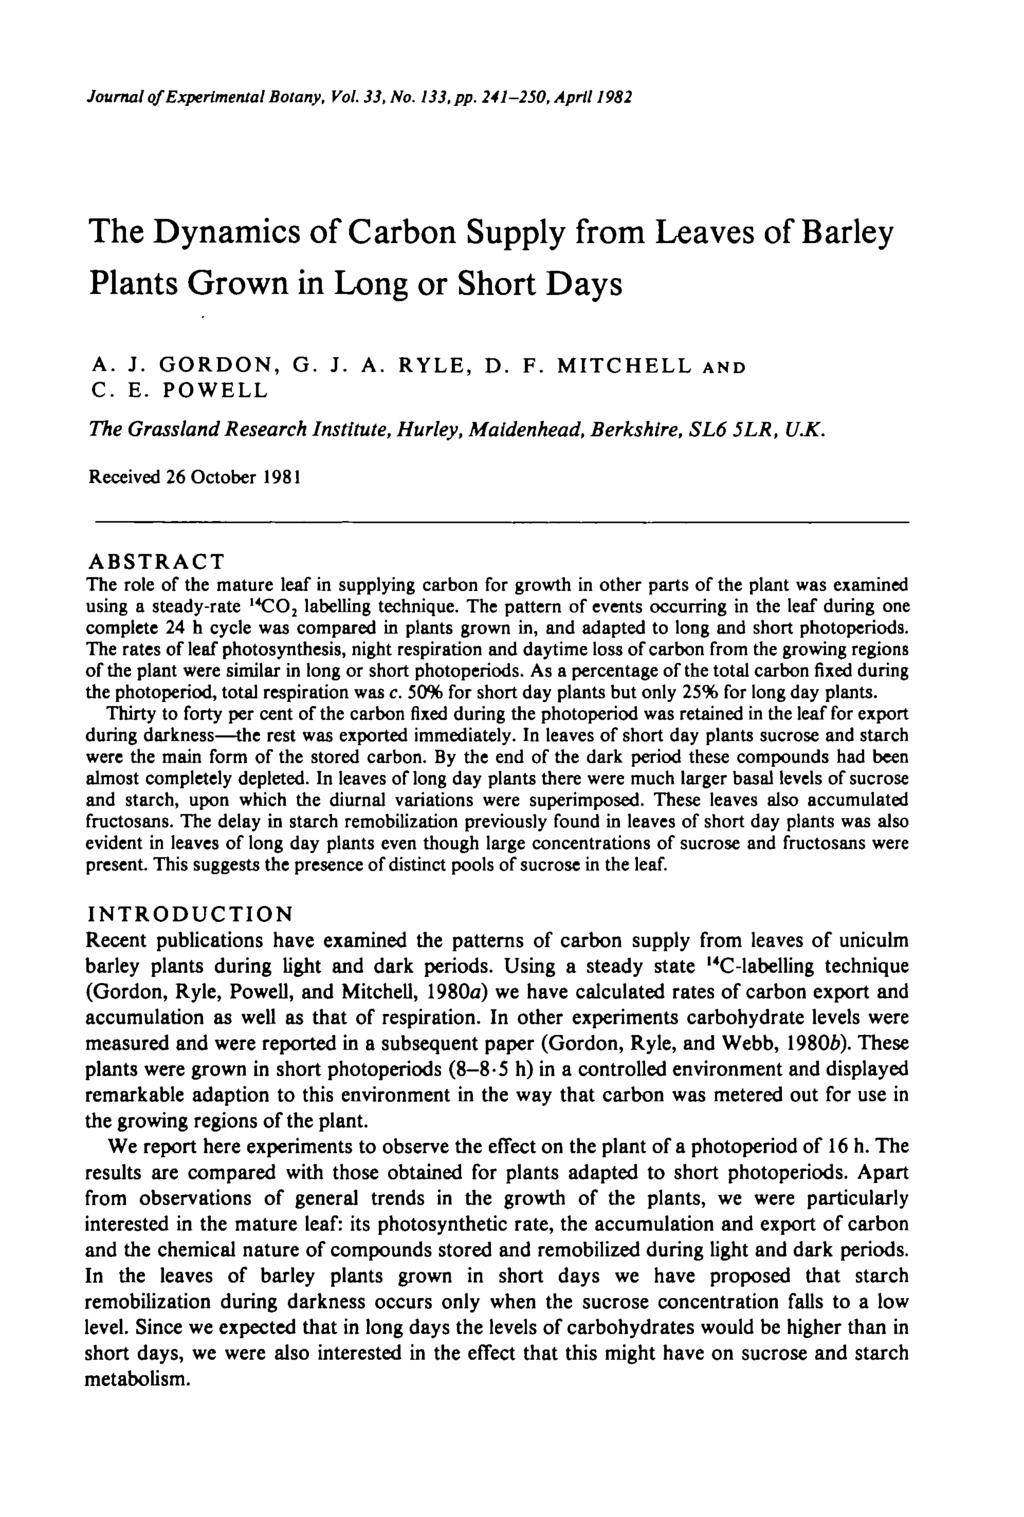 Journal of Experimental Botany, Vol. 33, No. 133, pp. 241-250, April 1982 The Dynamics of Carbon Supply from Leaves of Barley Plants Grown in Long or Short Days A. J. GORDON, G. J. A. RYLE, D. F.